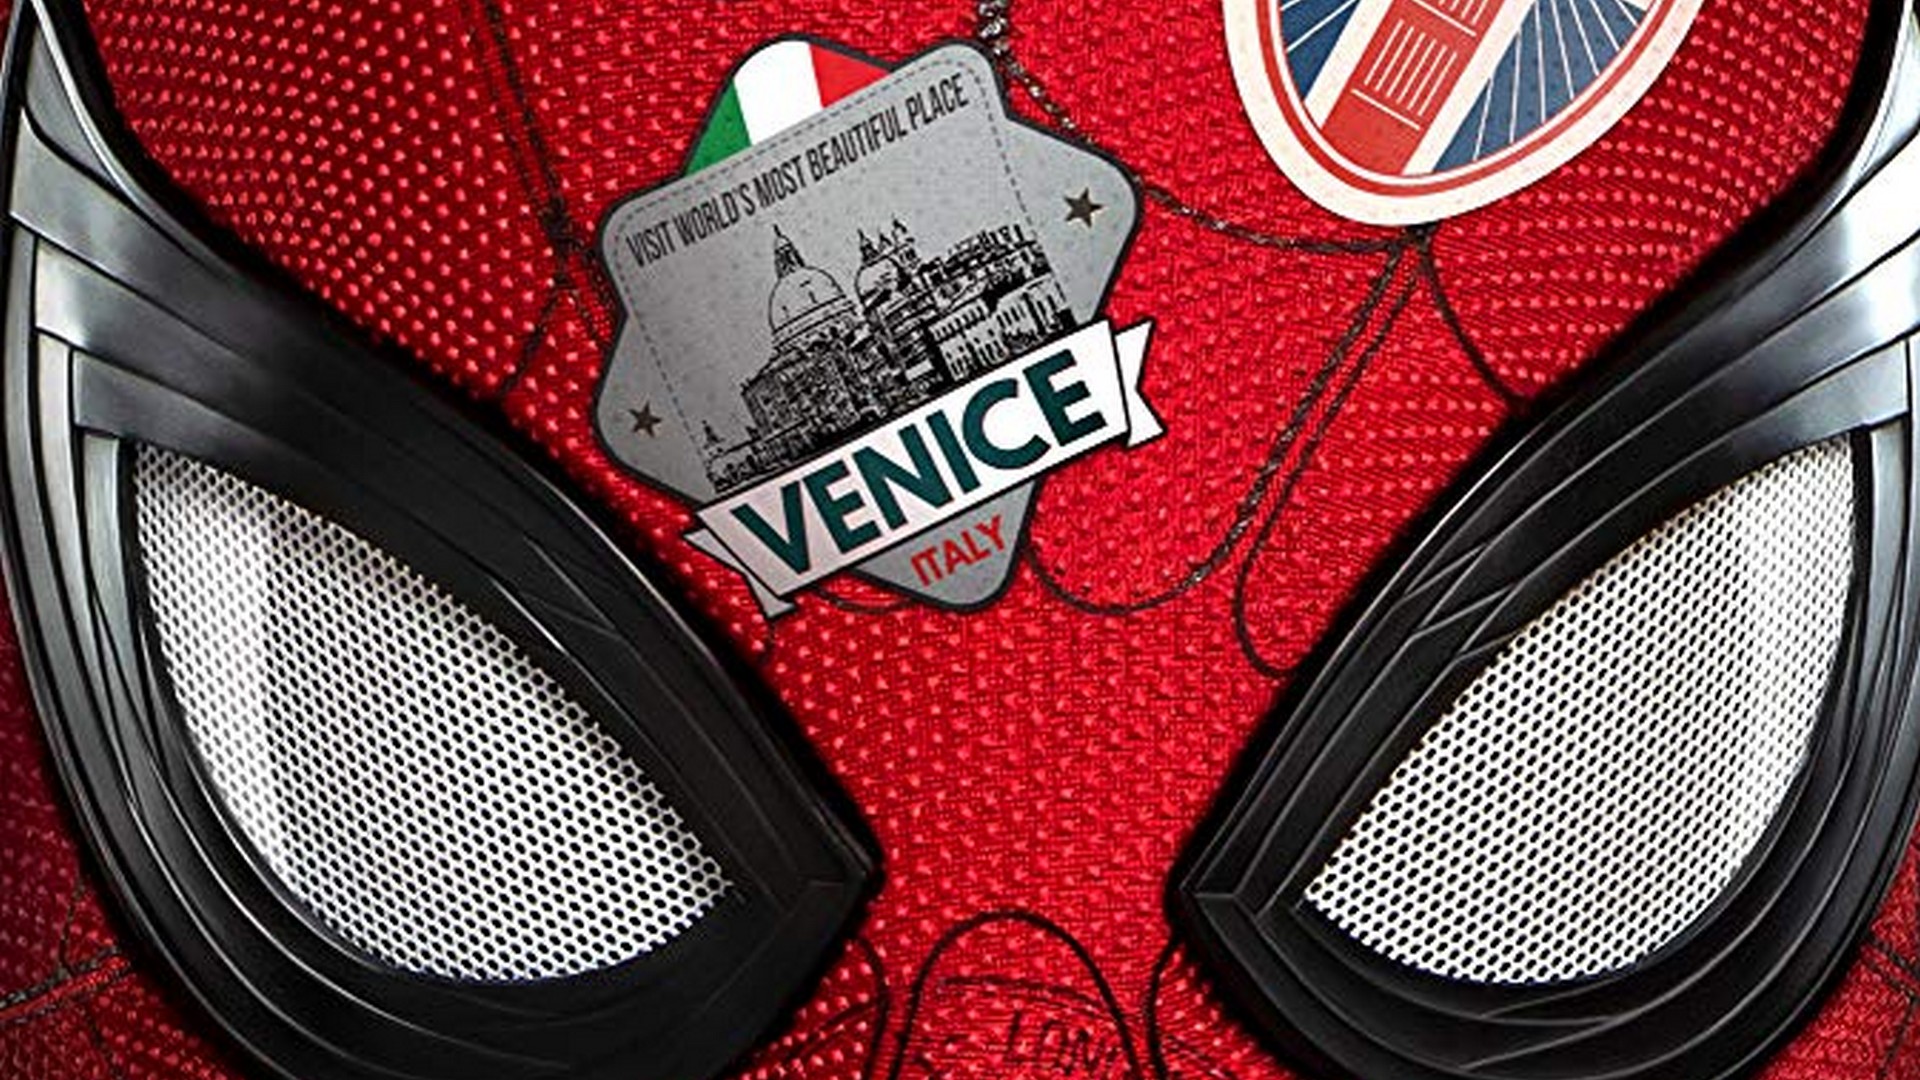 Spider-Man Far From Home Movie Wallpaper with high-resolution 1920x1080 pixel. You can use this poster wallpaper for your Desktop Computers, Mac Screensavers, Windows Backgrounds, iPhone Wallpapers, Tablet or Android Lock screen and another Mobile device